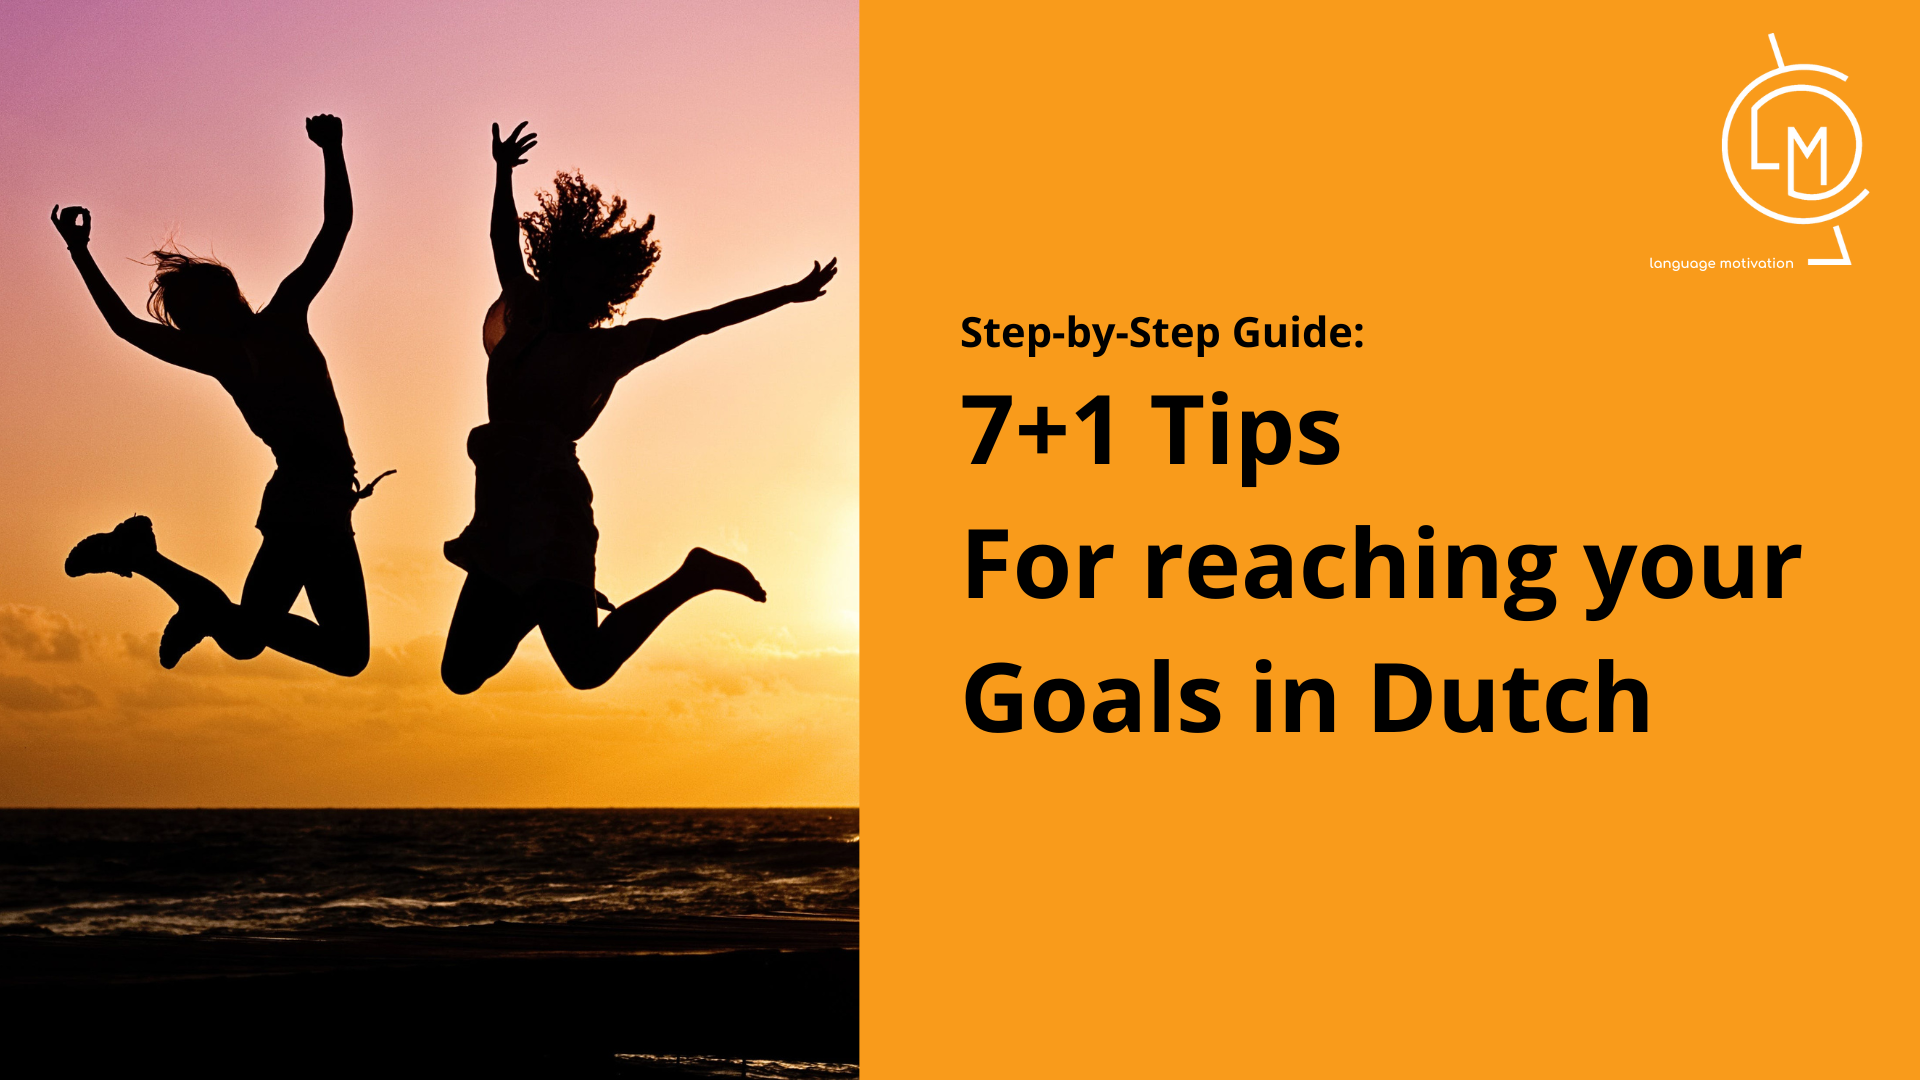 7+1 tips for reaching your goals in Dutch